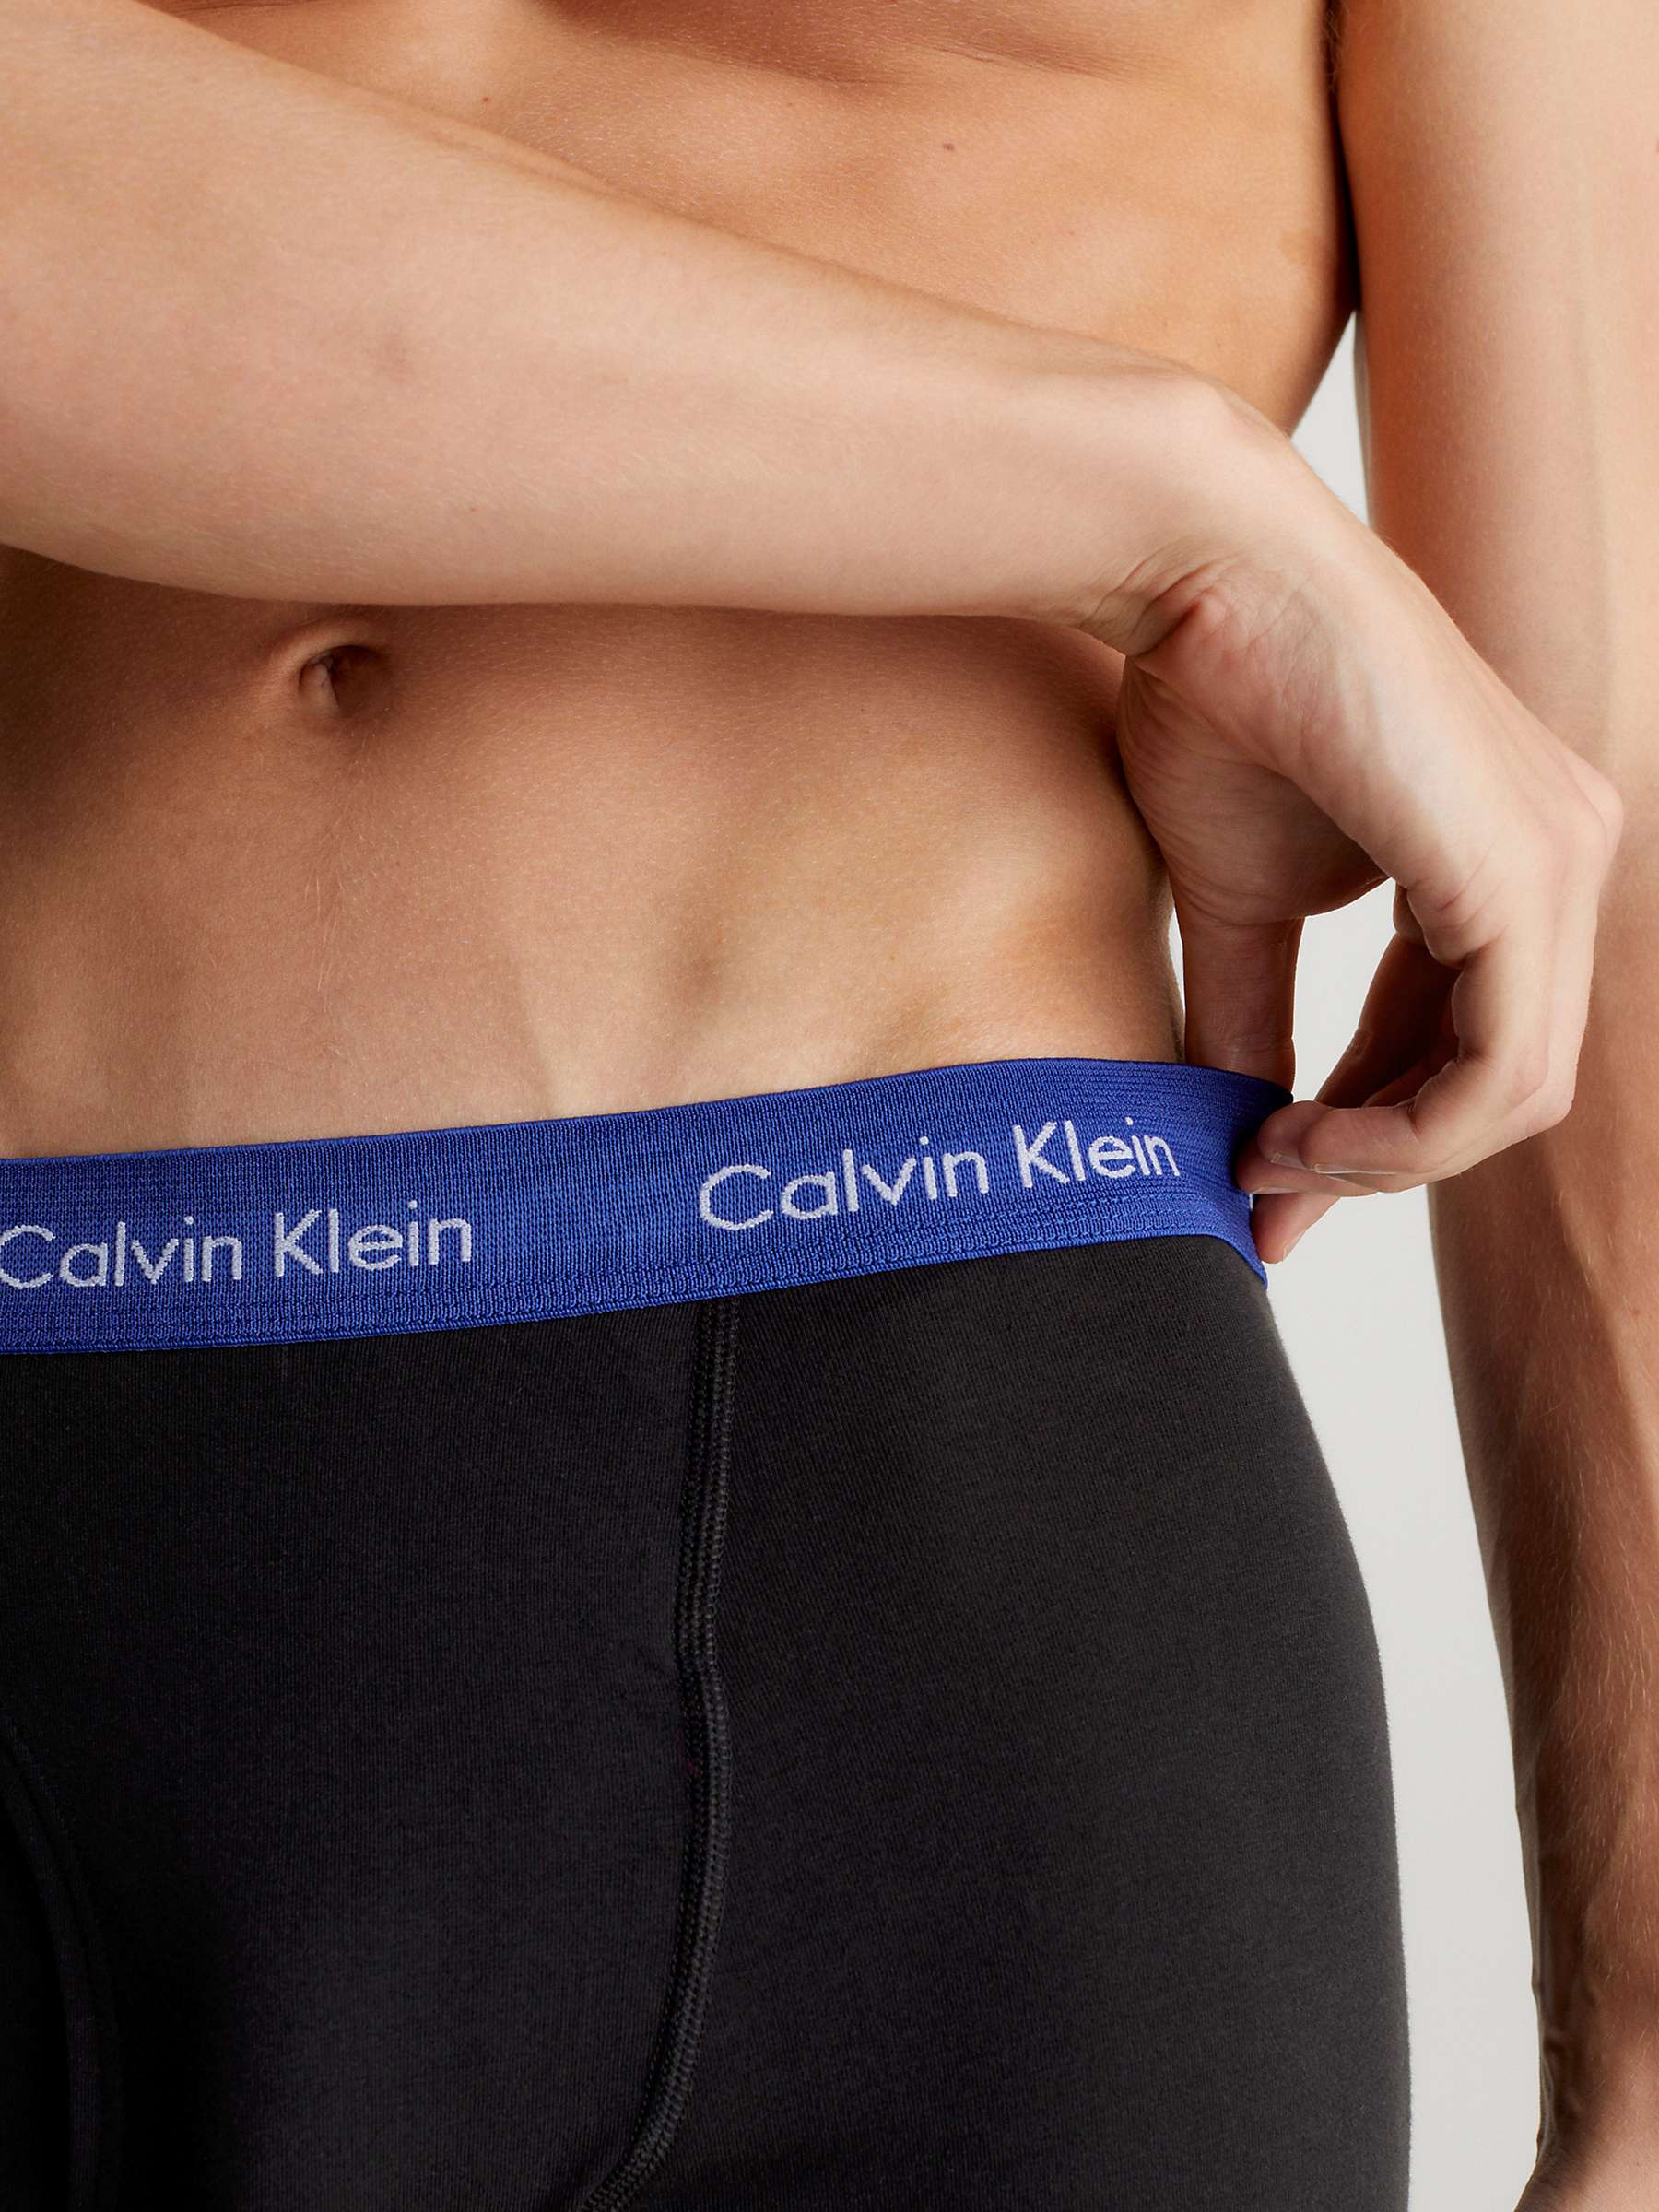 Buy Calvin Klein Classic Trunks, Pack of 3 Online at johnlewis.com